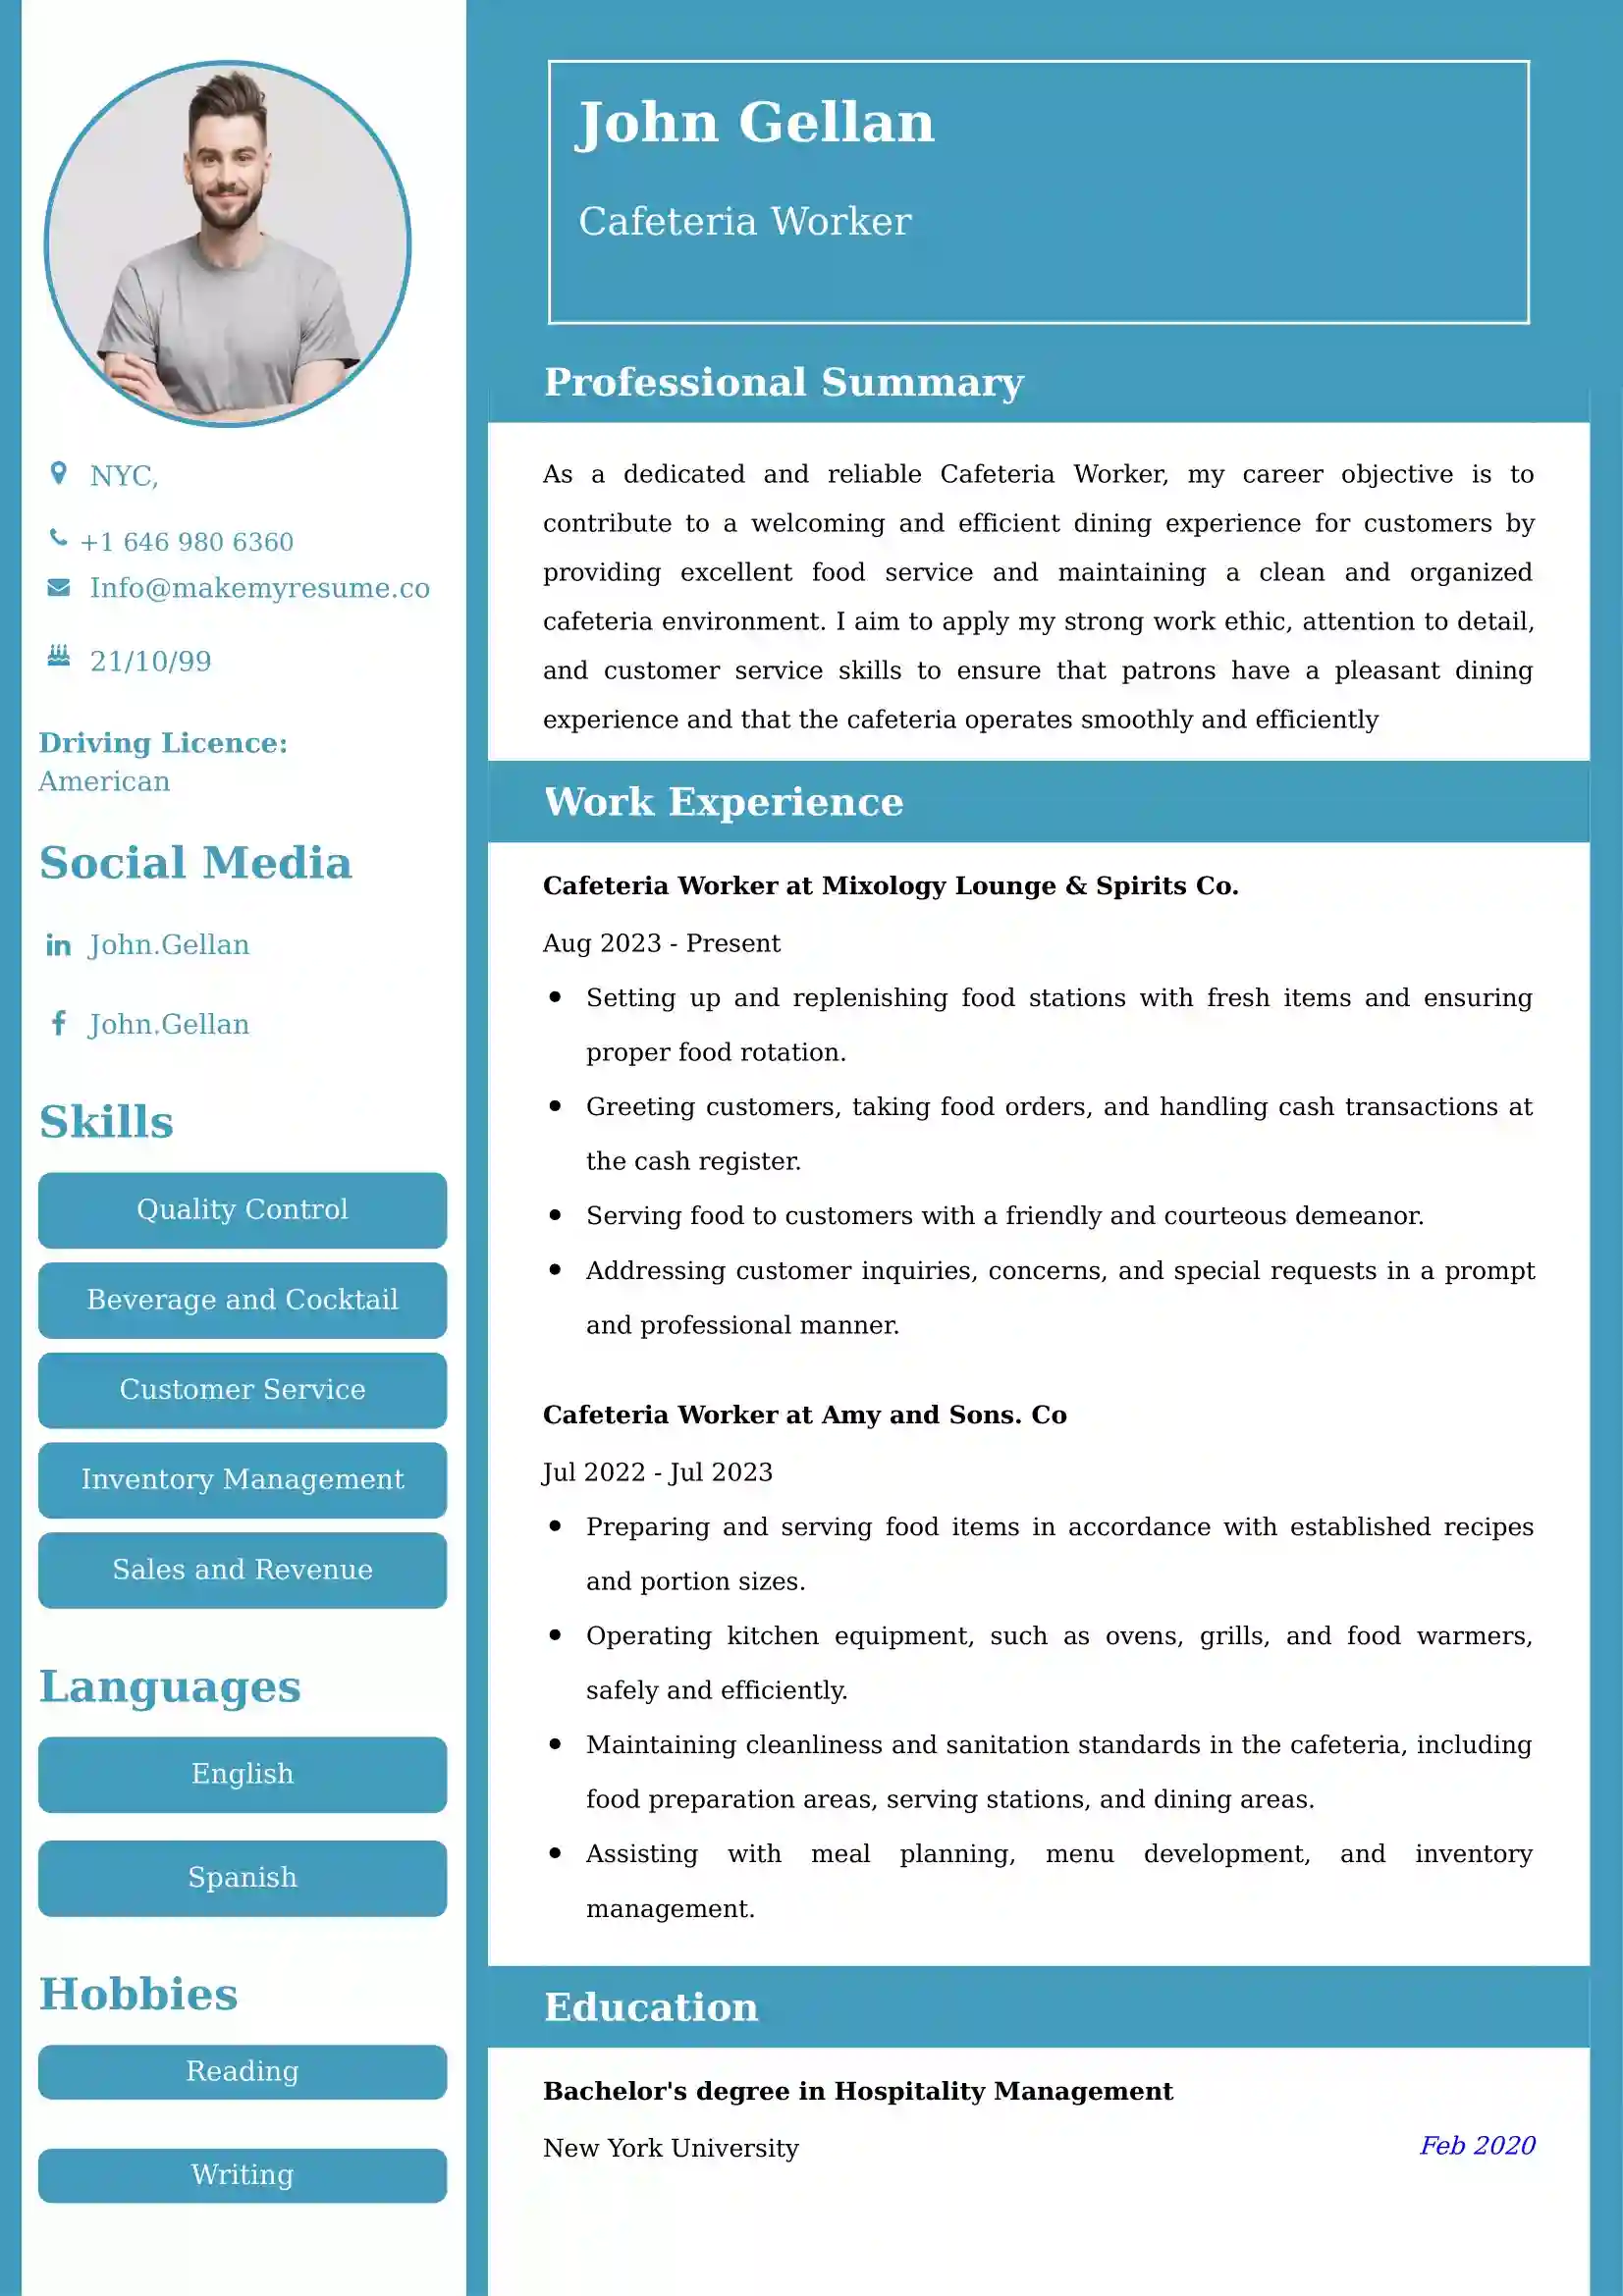 Cafeteria Worker Resume Examples - Brazilian Format, Latest Template